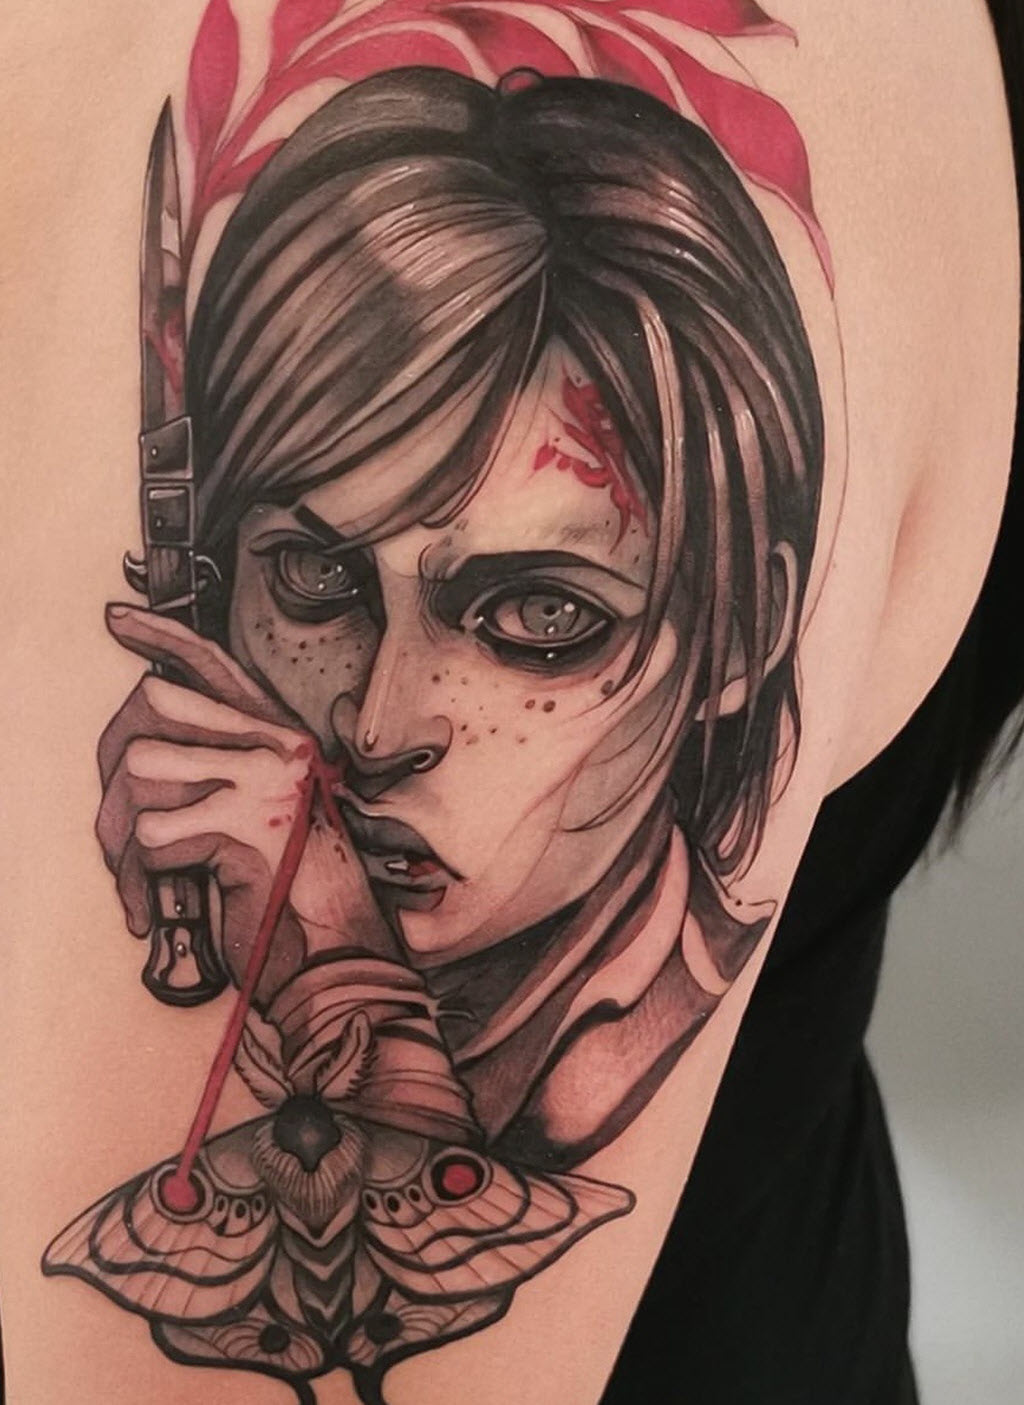 Naughty Dog, LLC - Check out this fine line tattoo of Ellie from